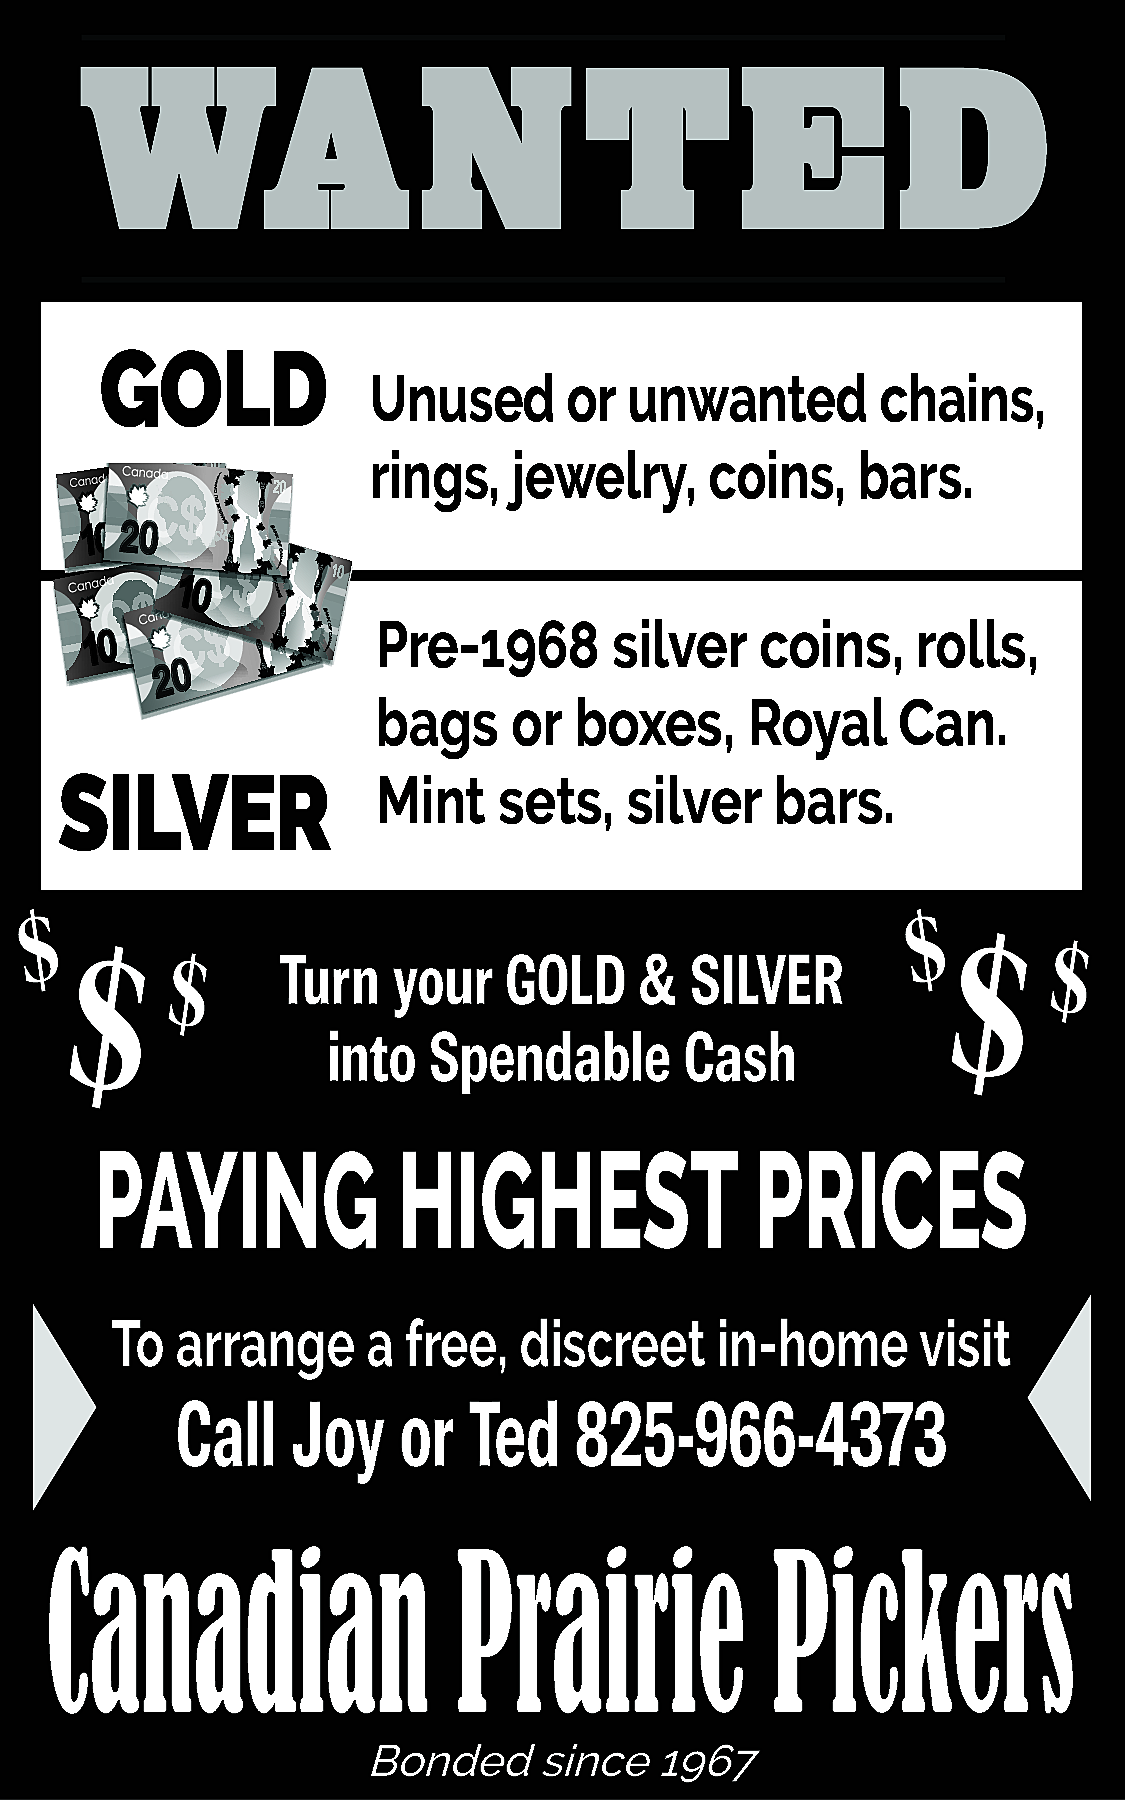 WANTED <br>GOLD <br> <br>SILVER <br>  WANTED  GOLD    SILVER    $    $    $    Unused or unwanted chains,  rings, jewelry, coins, bars.  Pre-1968 silver coins, rolls,  bags or boxes, Royal Can.  Mint sets, silver bars.    Turn your GOLD & SILVER  into Spendable Cash    $    $ $    PAYING HIGHEST PRICES  To arrange a free, discreet in-home visit    Call Joy or Ted 825-966-4373    Canadian Prairie Pickers  Bonded since 1967    